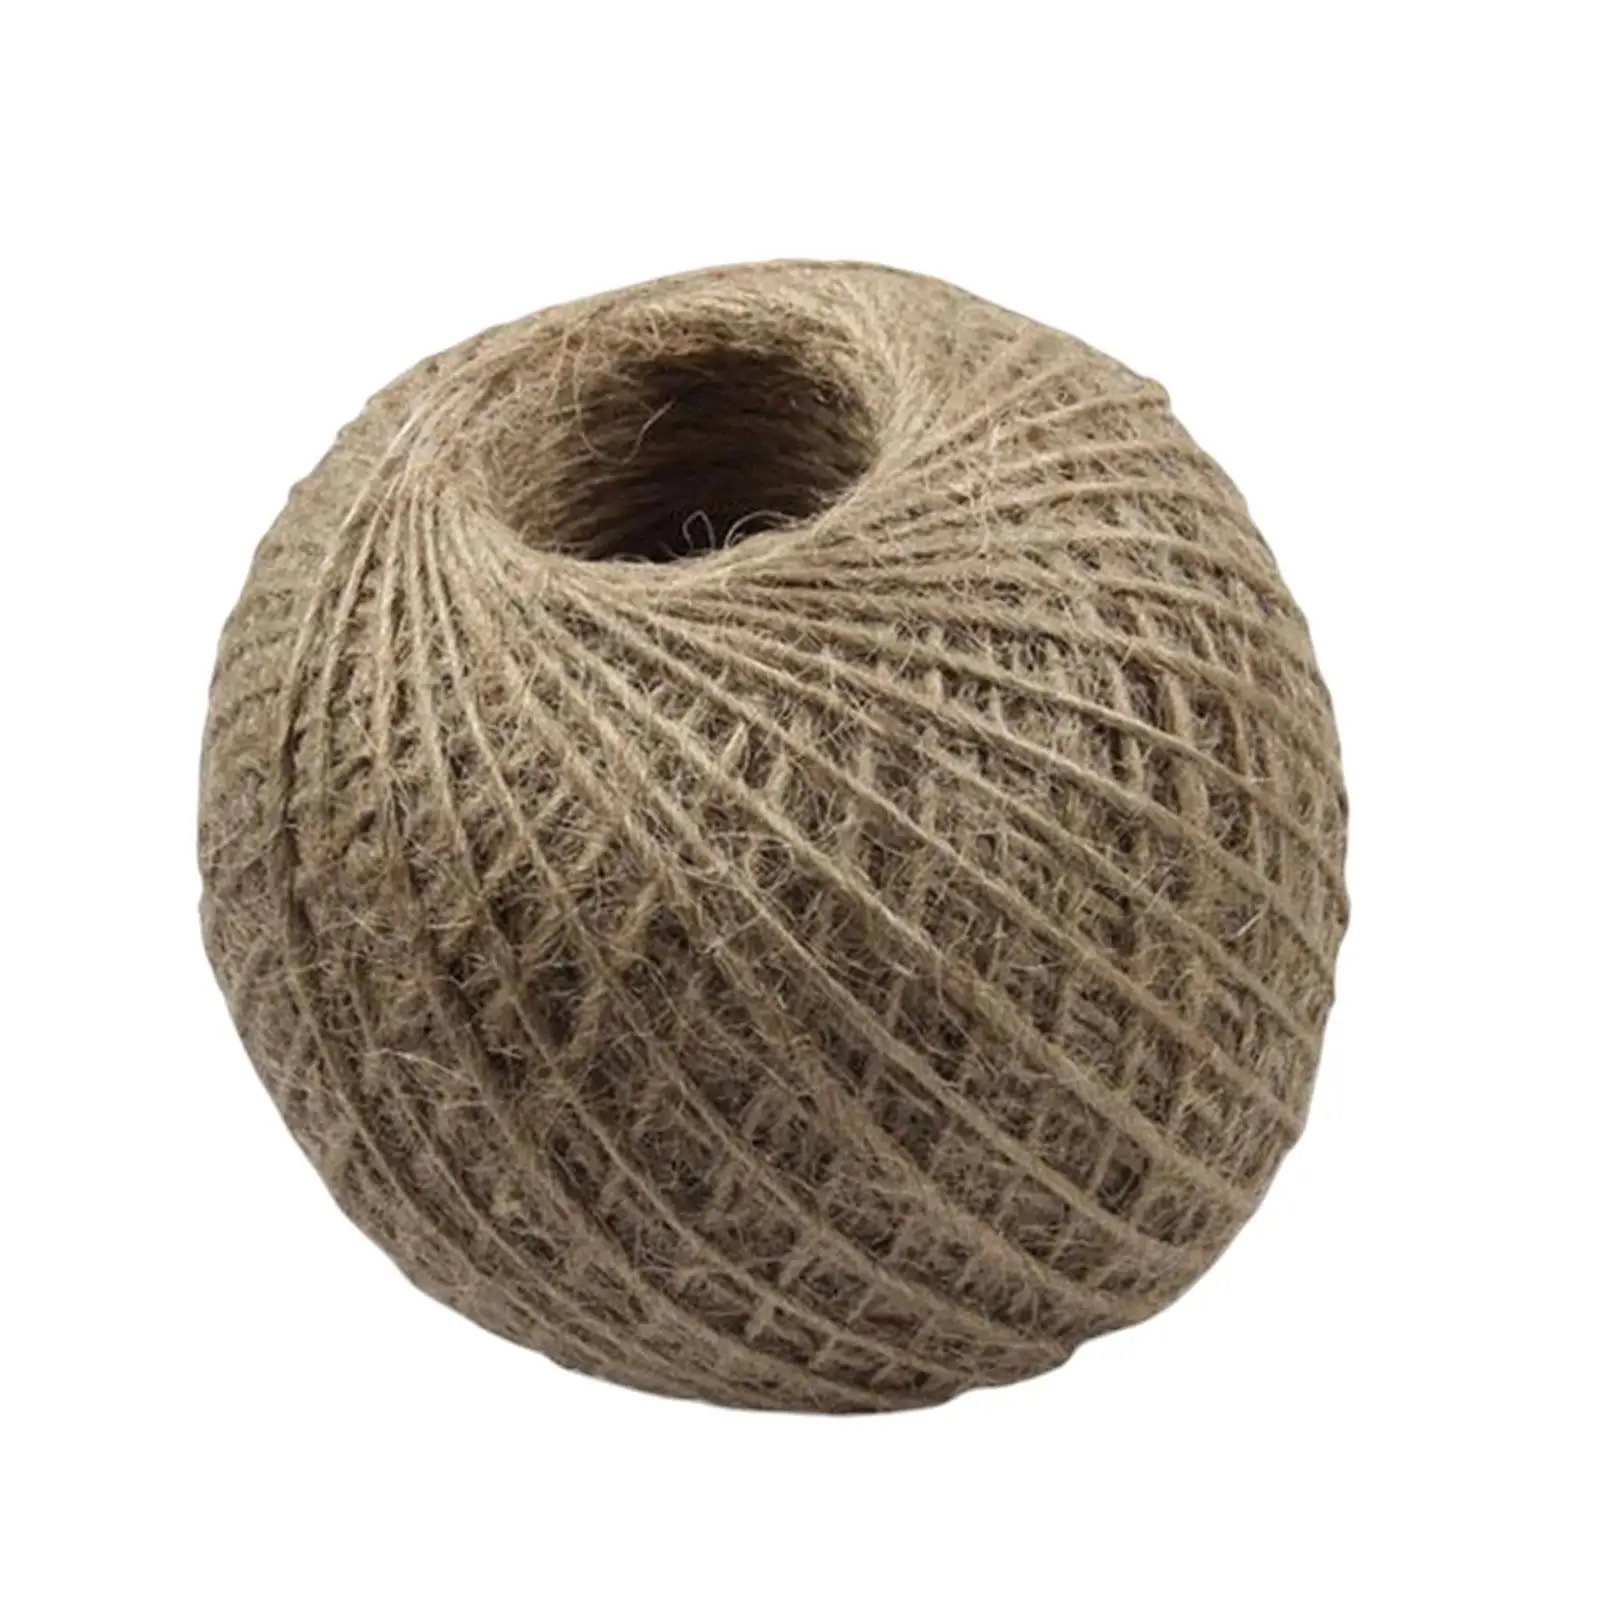 Jute Burlap Hemp String Eco Friendly Hand Woven Twisted Cord for Artwork Packing Materials Home Decor Gift Tags Plant Hanger